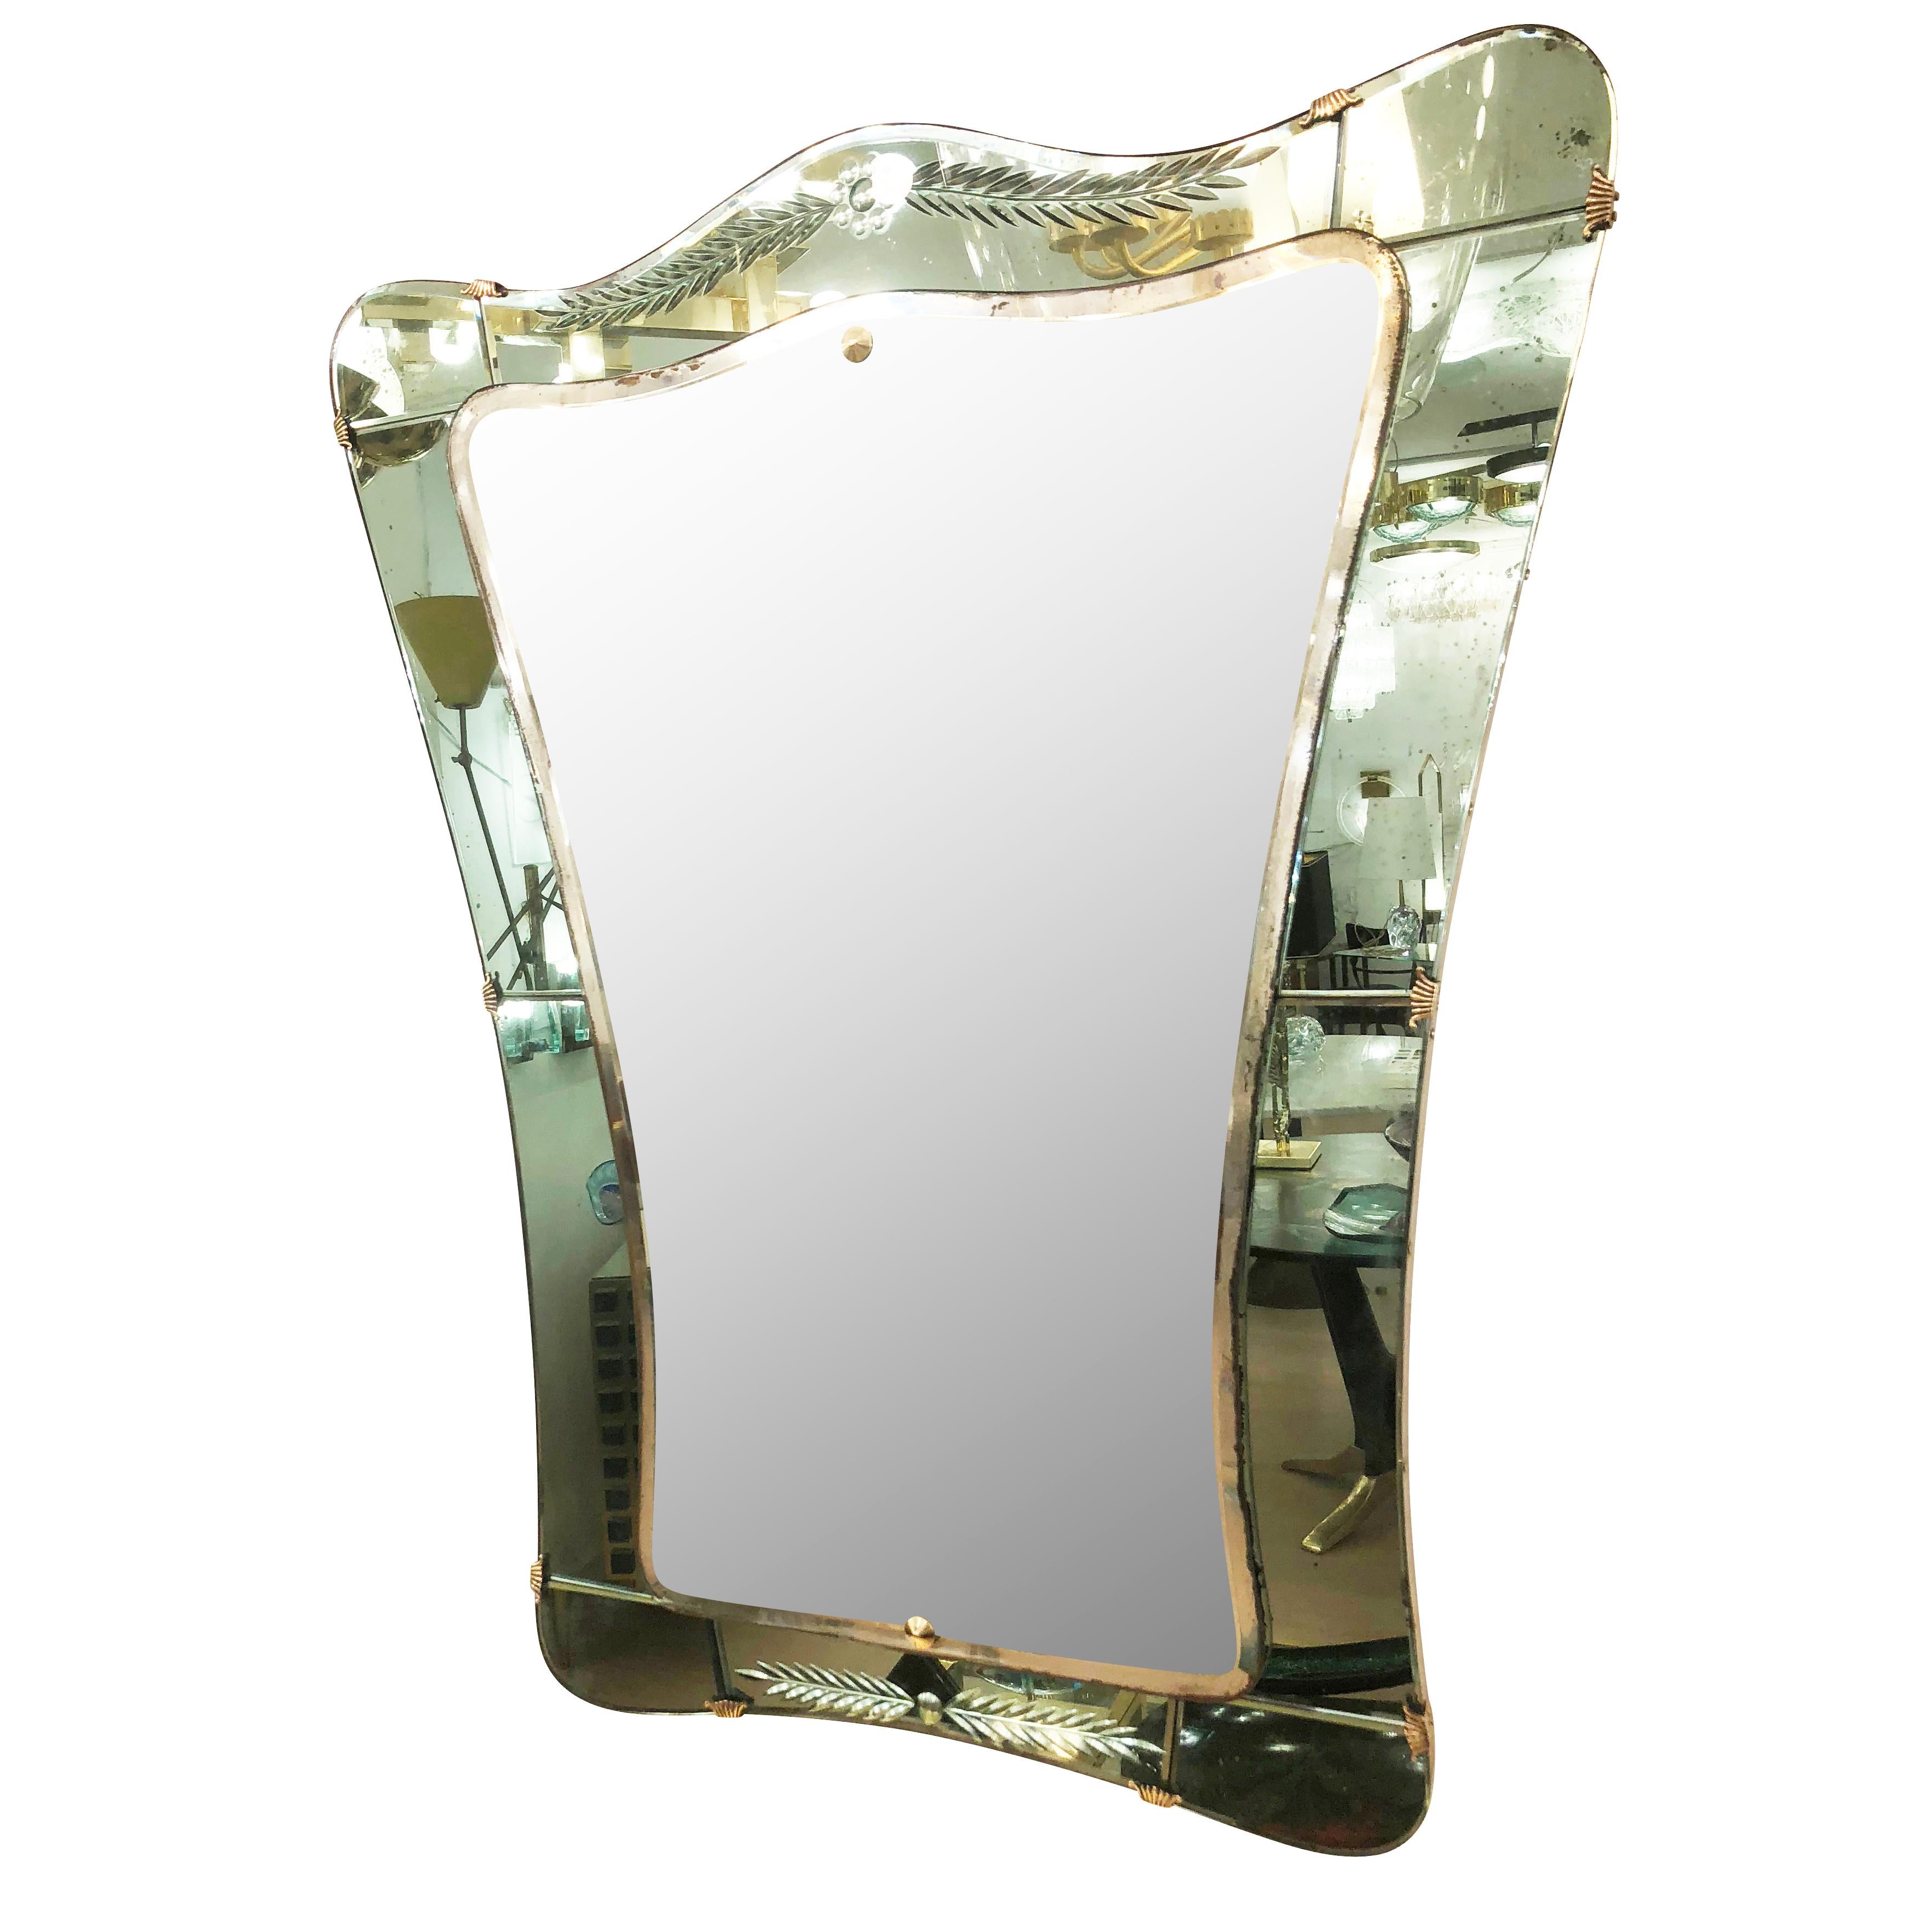 1950s Cristal art mirror with an etched acqua colored frame and brass details.

Condition: Age spots to mirror and frame

Measures: Width 32.5”

Depth 1”

Height 38”.

 